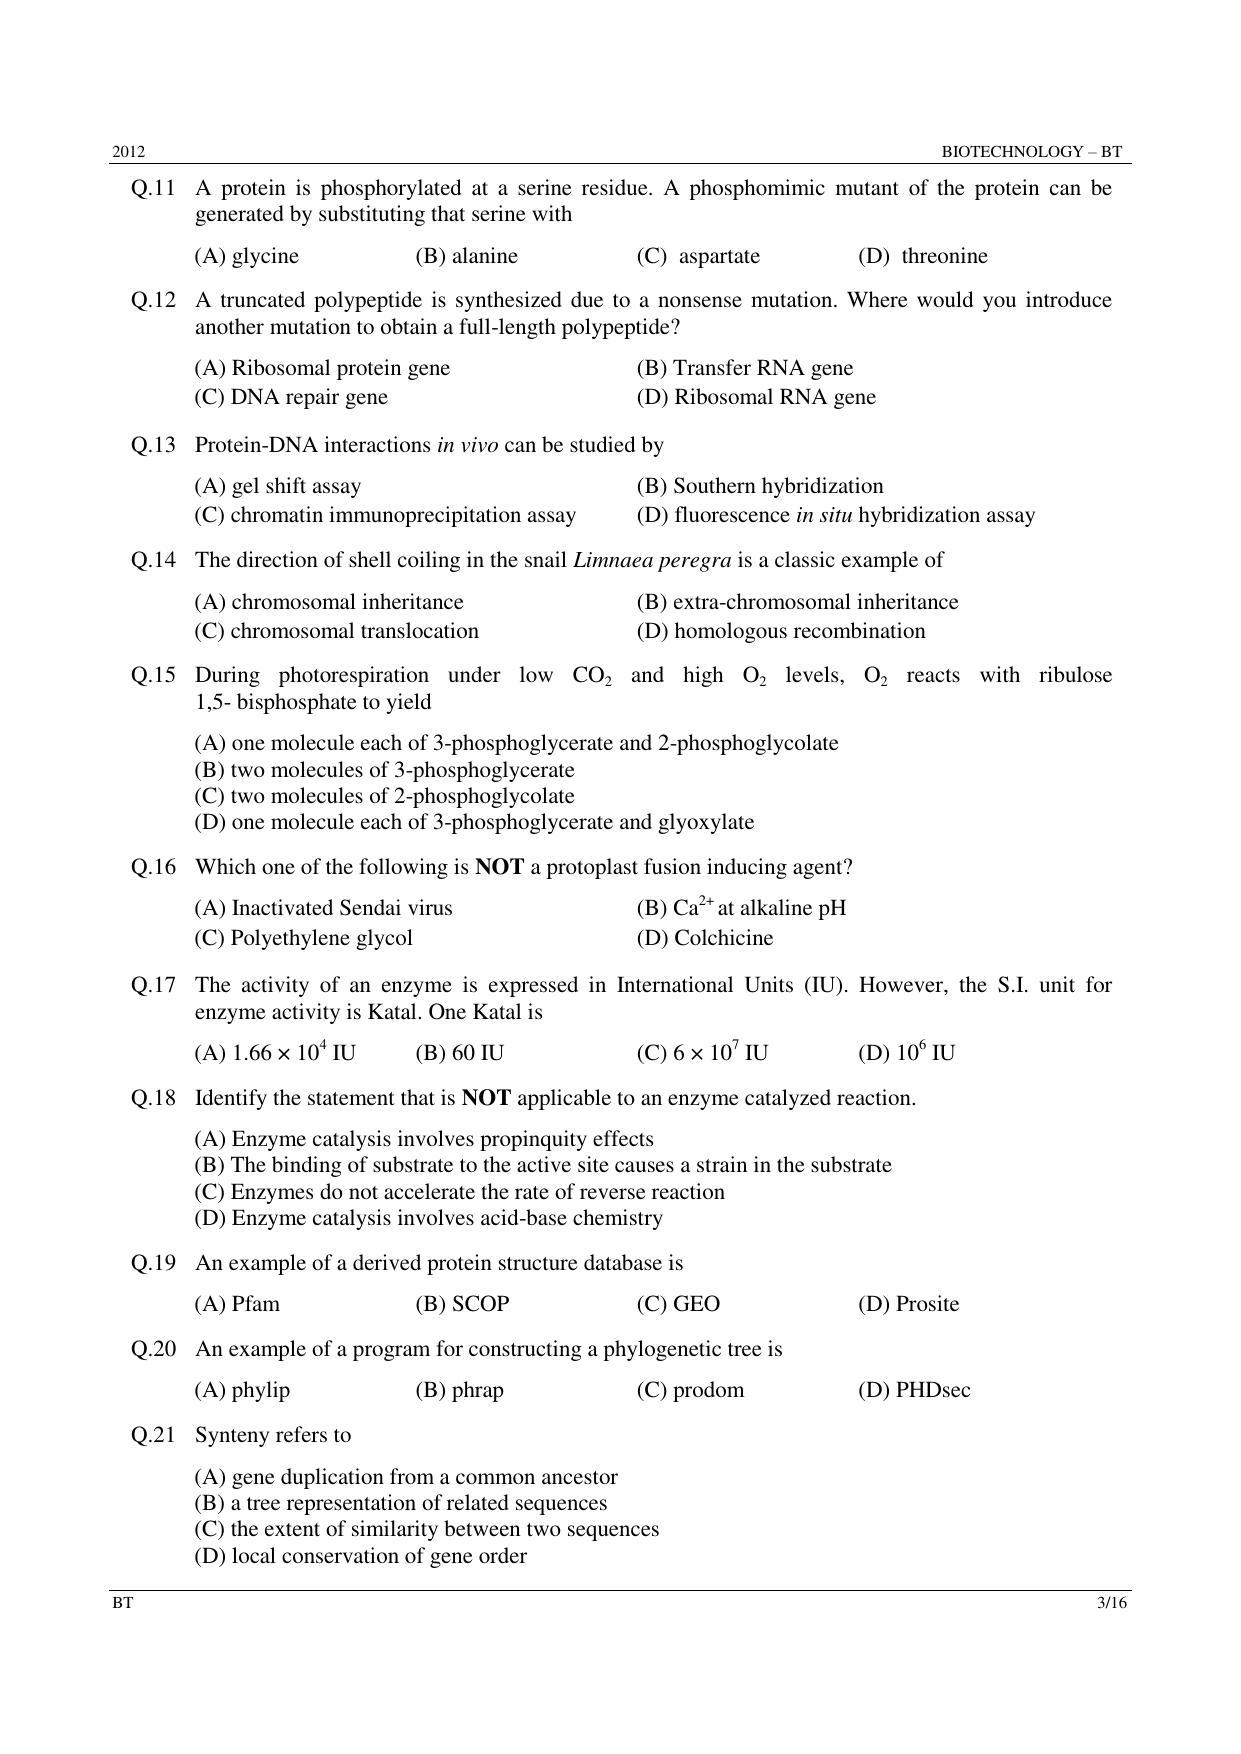 GATE 2012 Biotechnology (BT) Question Paper with Answer Key - Page 3